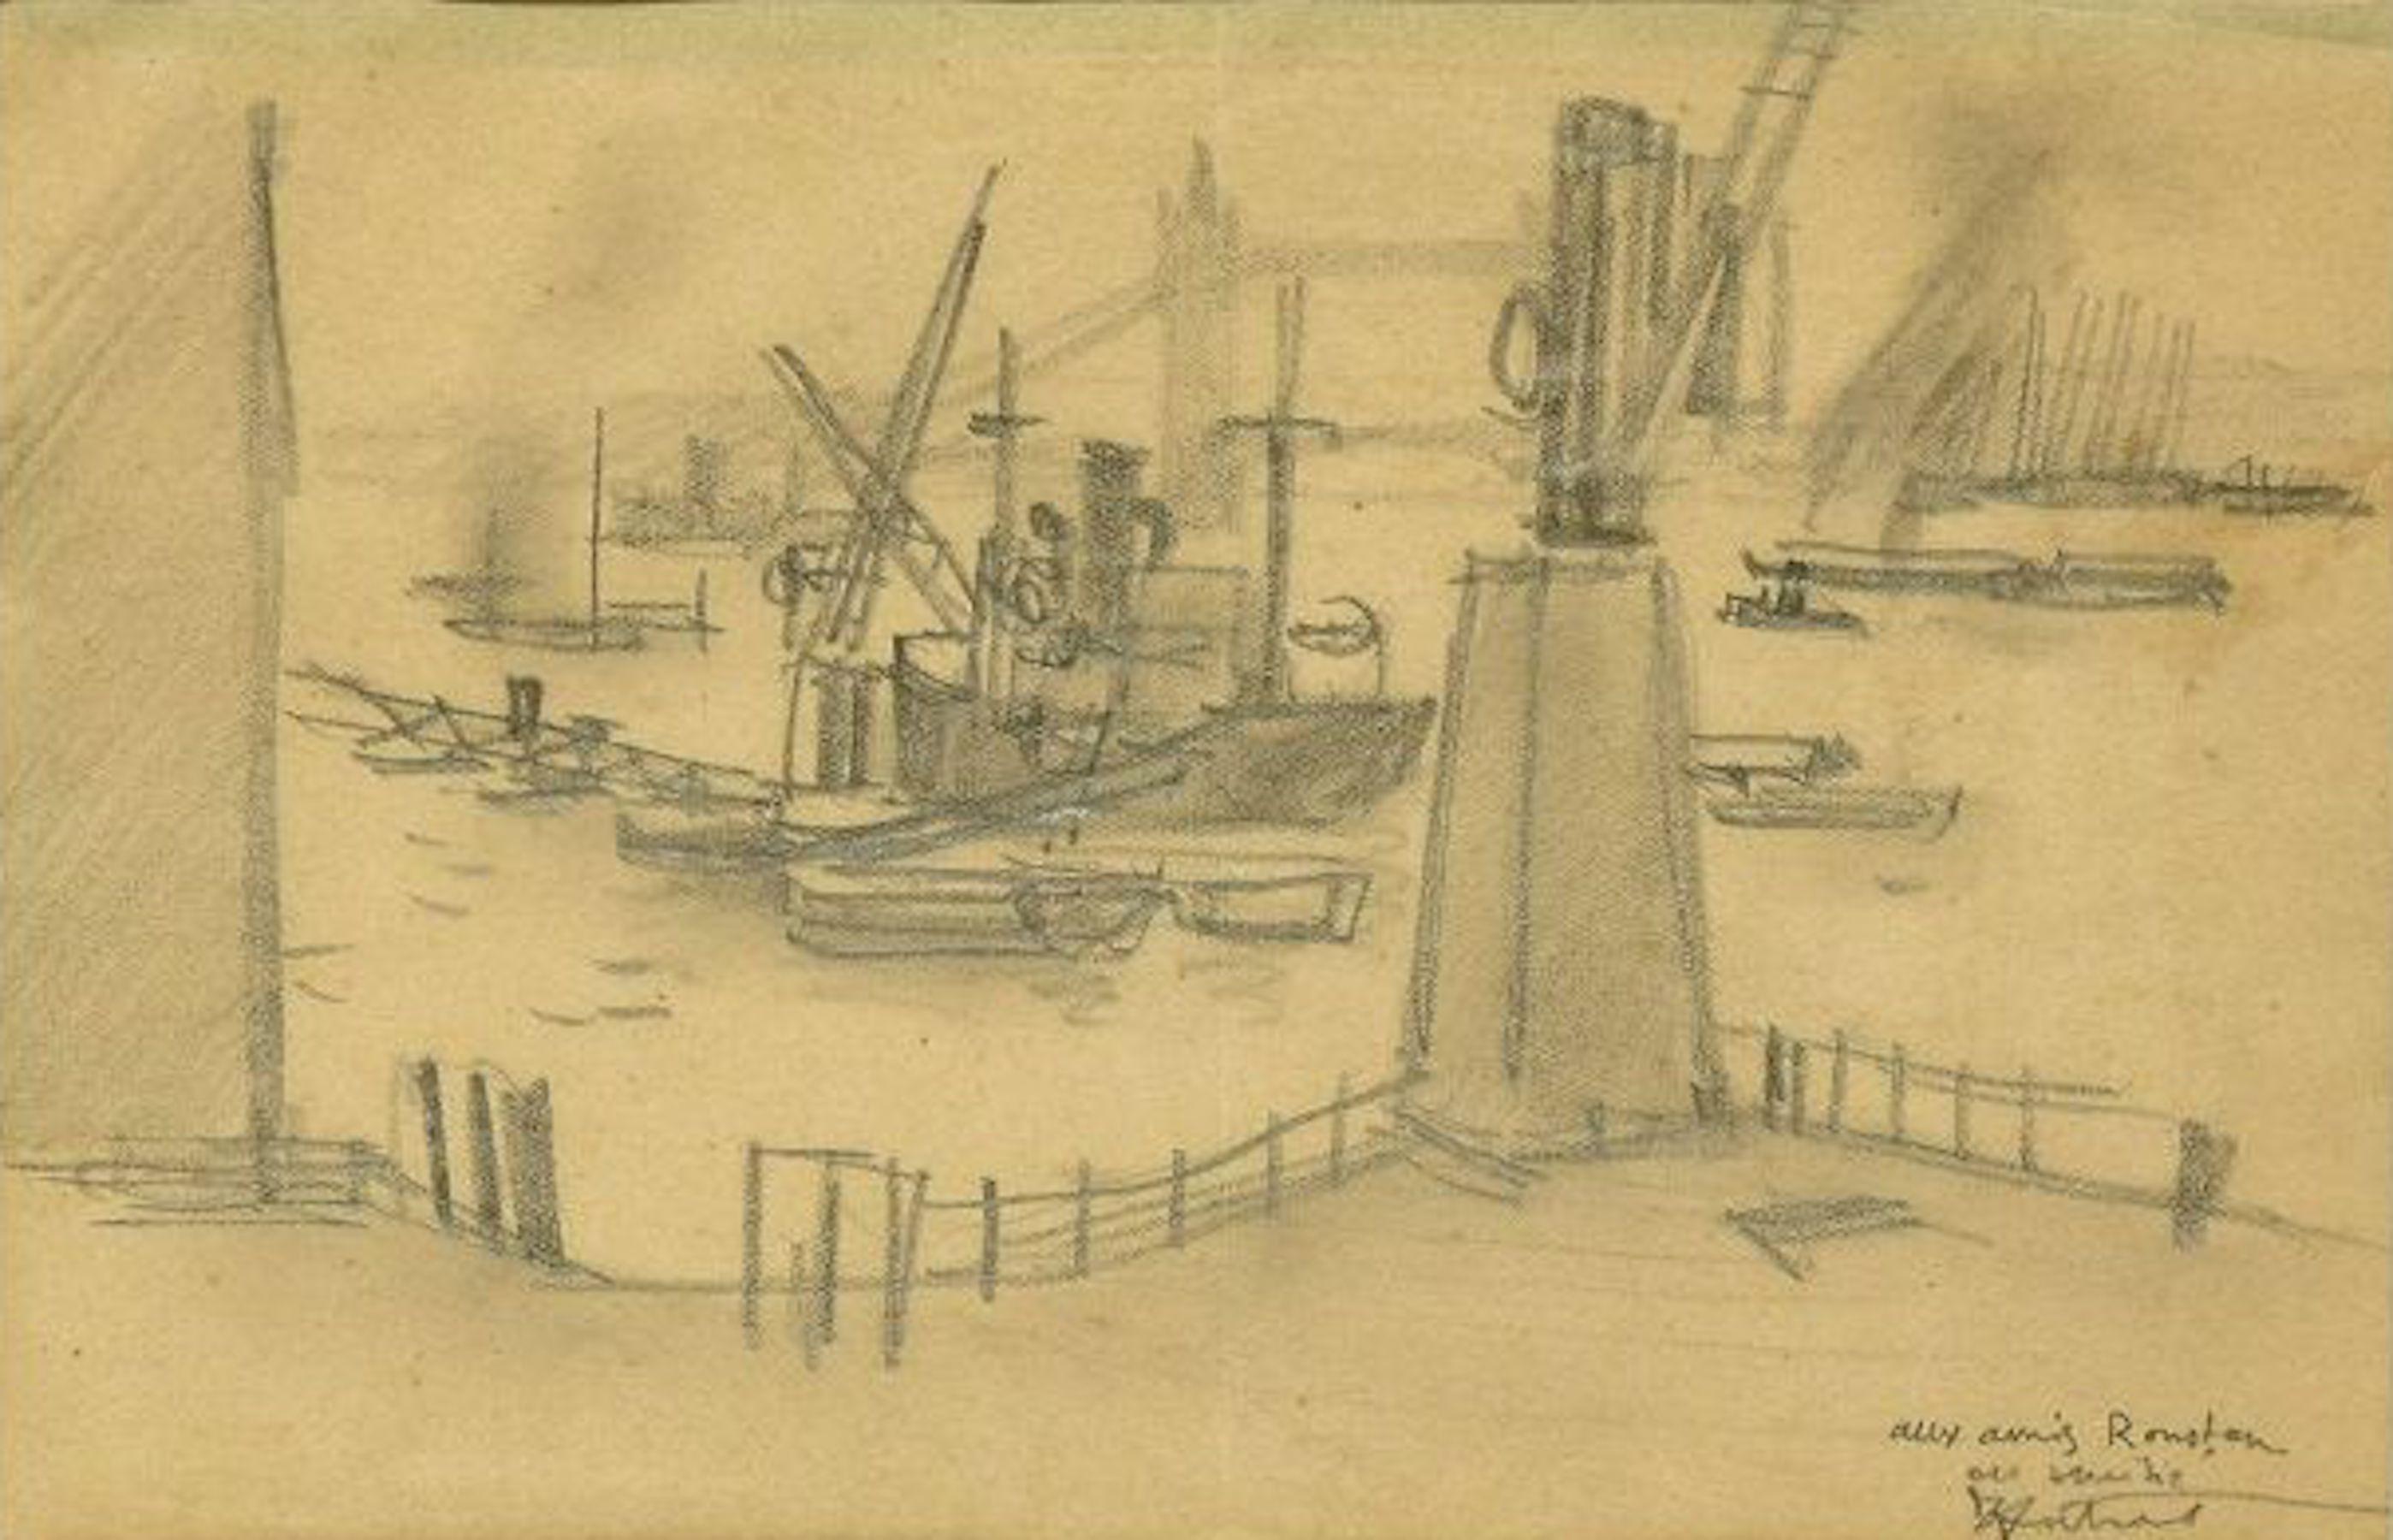 London Harbor - Charcoal Drawing by R.L. Antral - 1930s